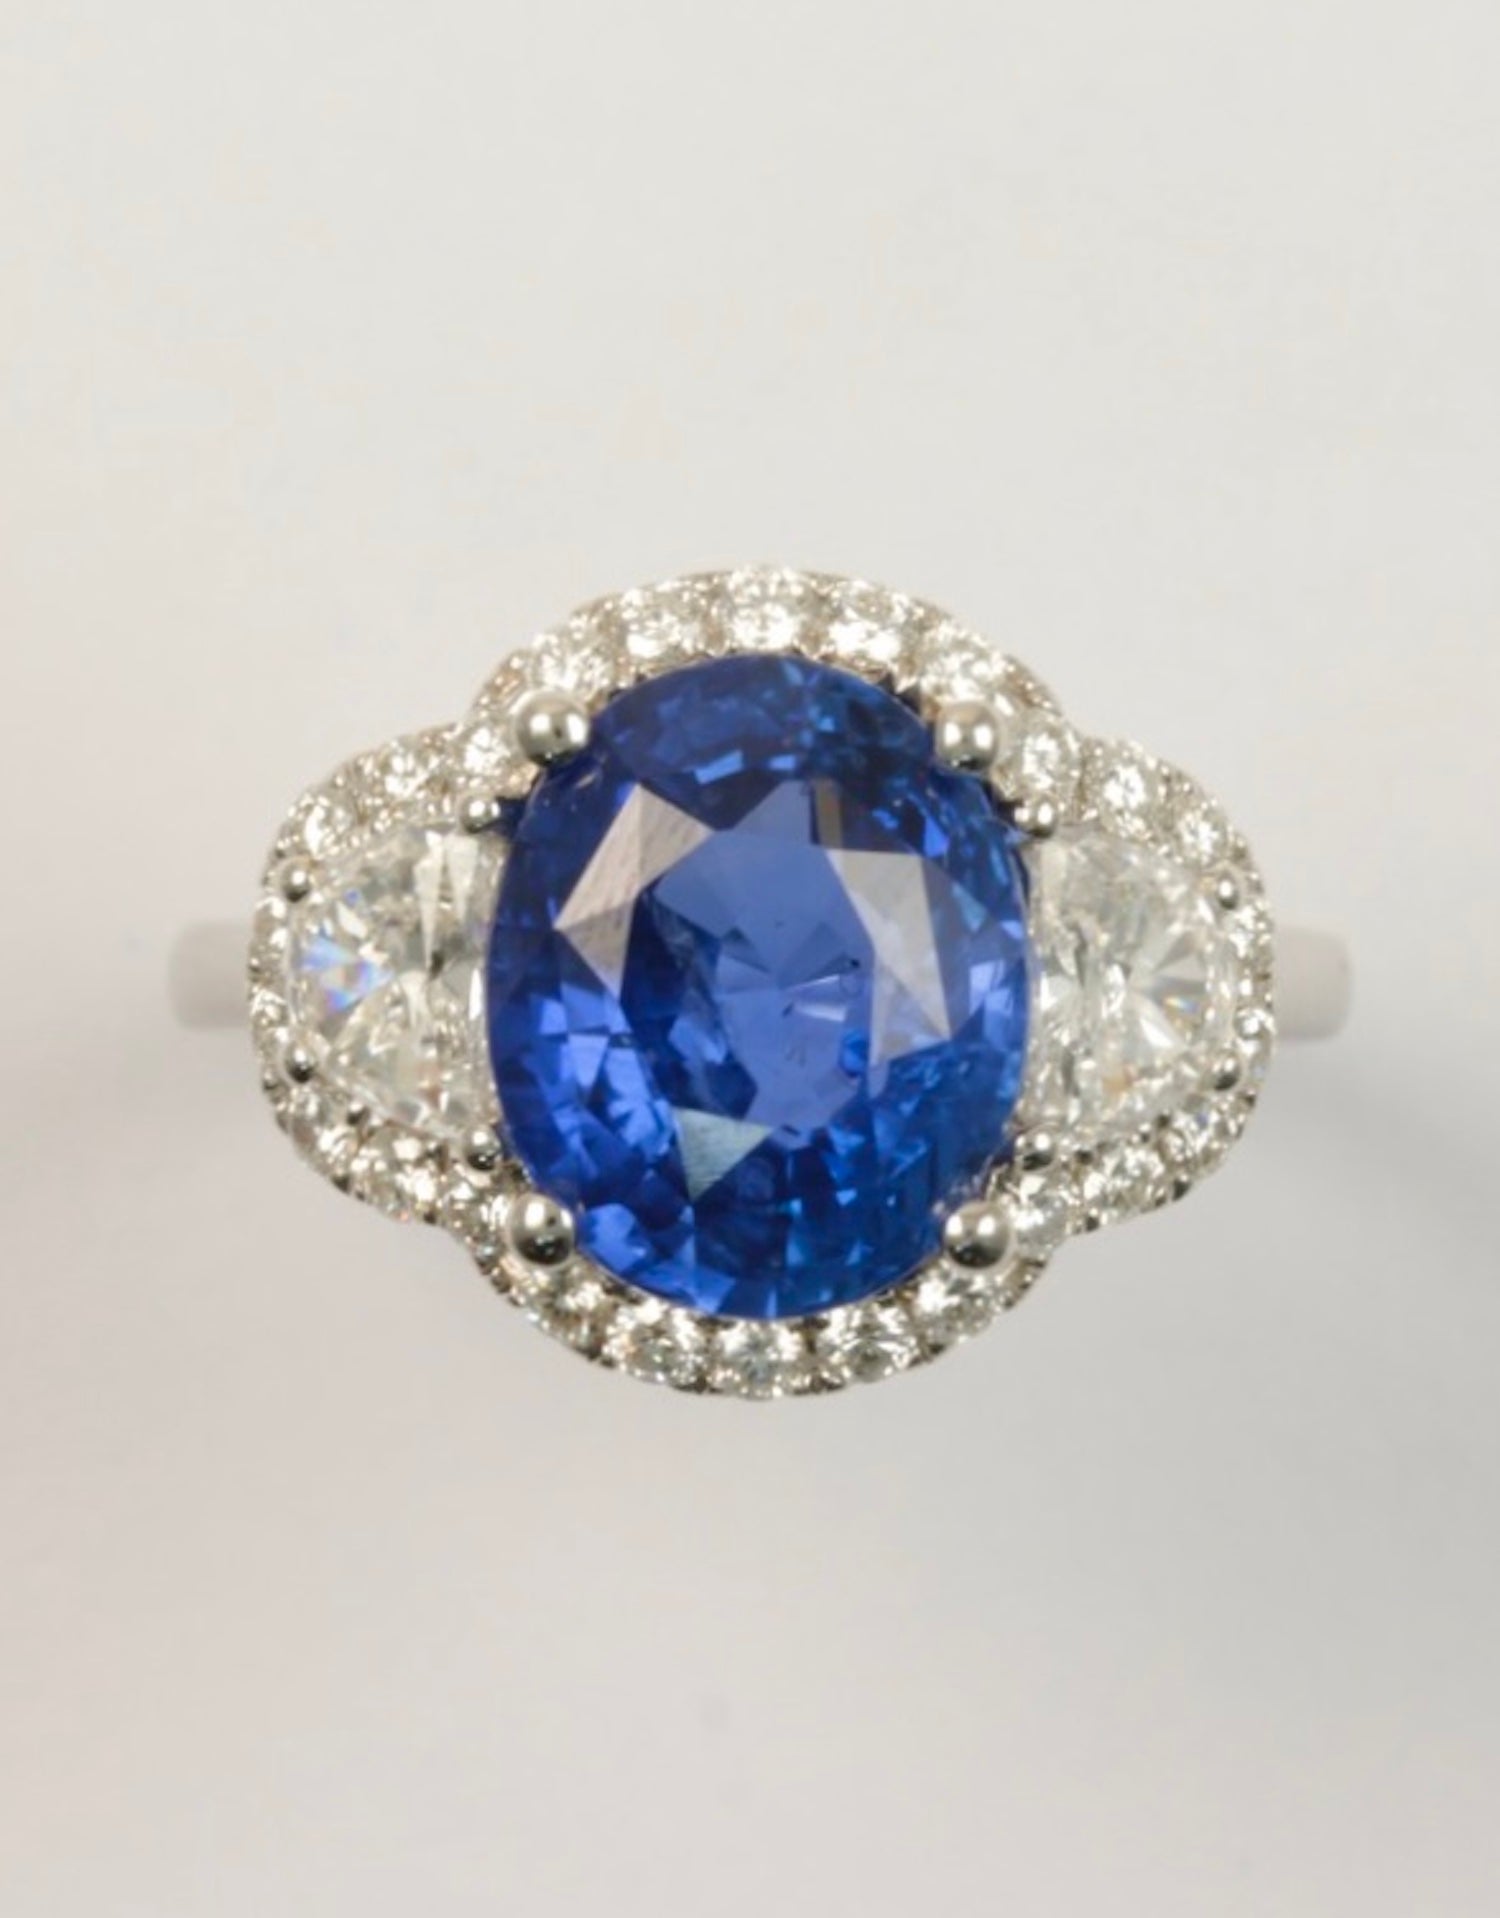 Due to its natural vibrant color, this unheated 6.00 carats sapphire from Sri Lanka is very rare by nature and of the most desired quality.

In this spectacular ring, the blue sapphire is flanked by half-moon diamonds with a combined weight of 0.68